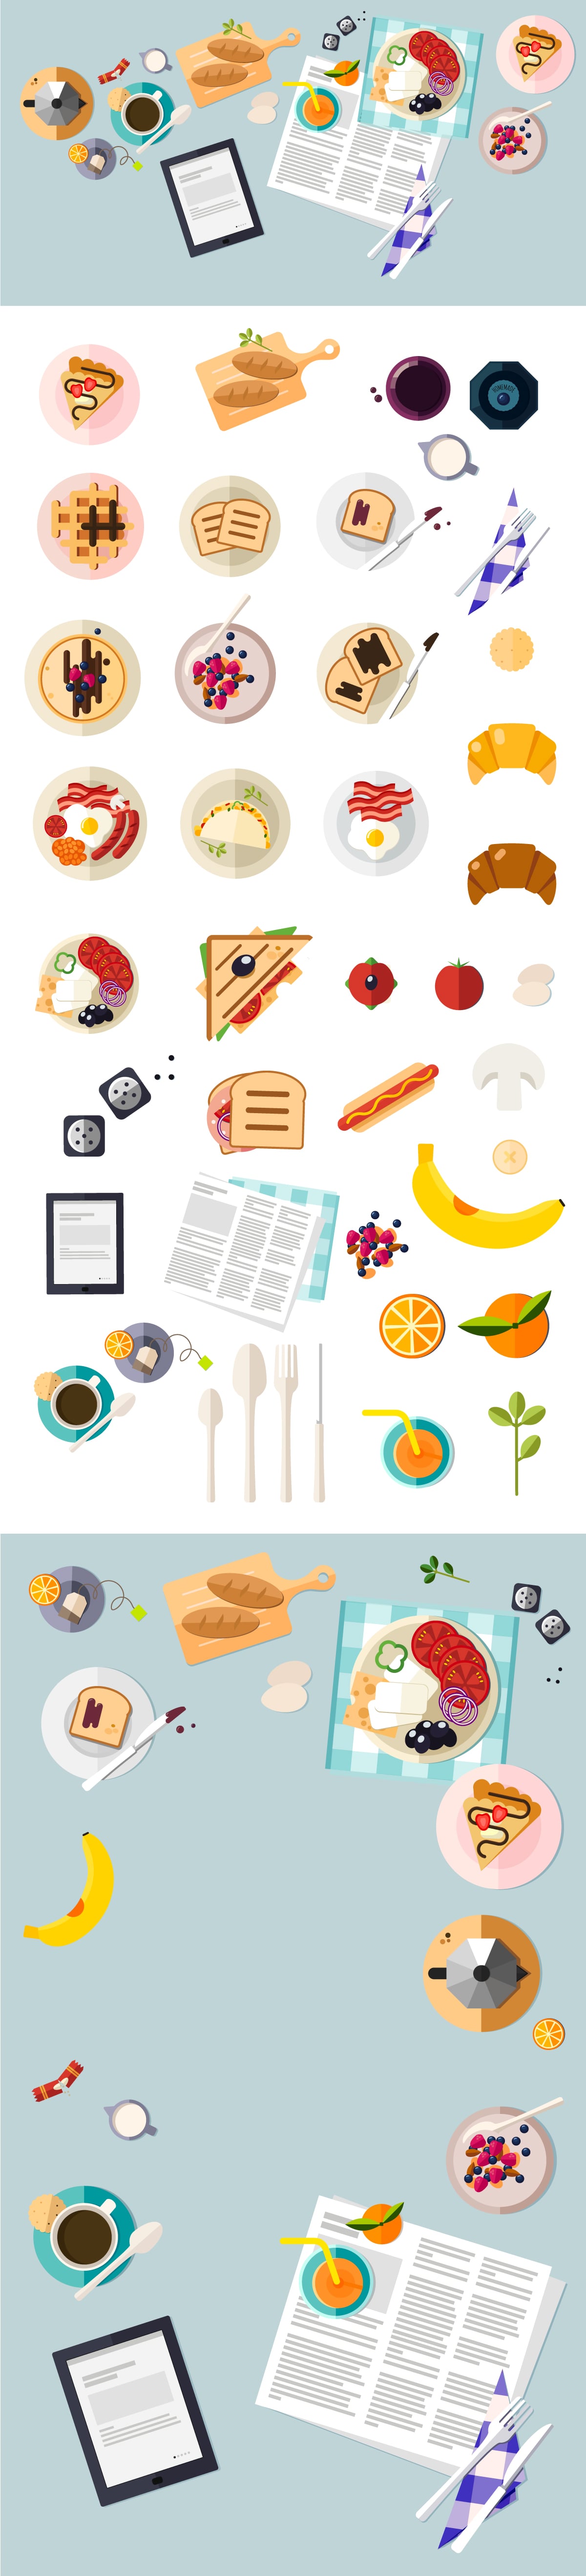 An illustration of food suitable for breakfast.